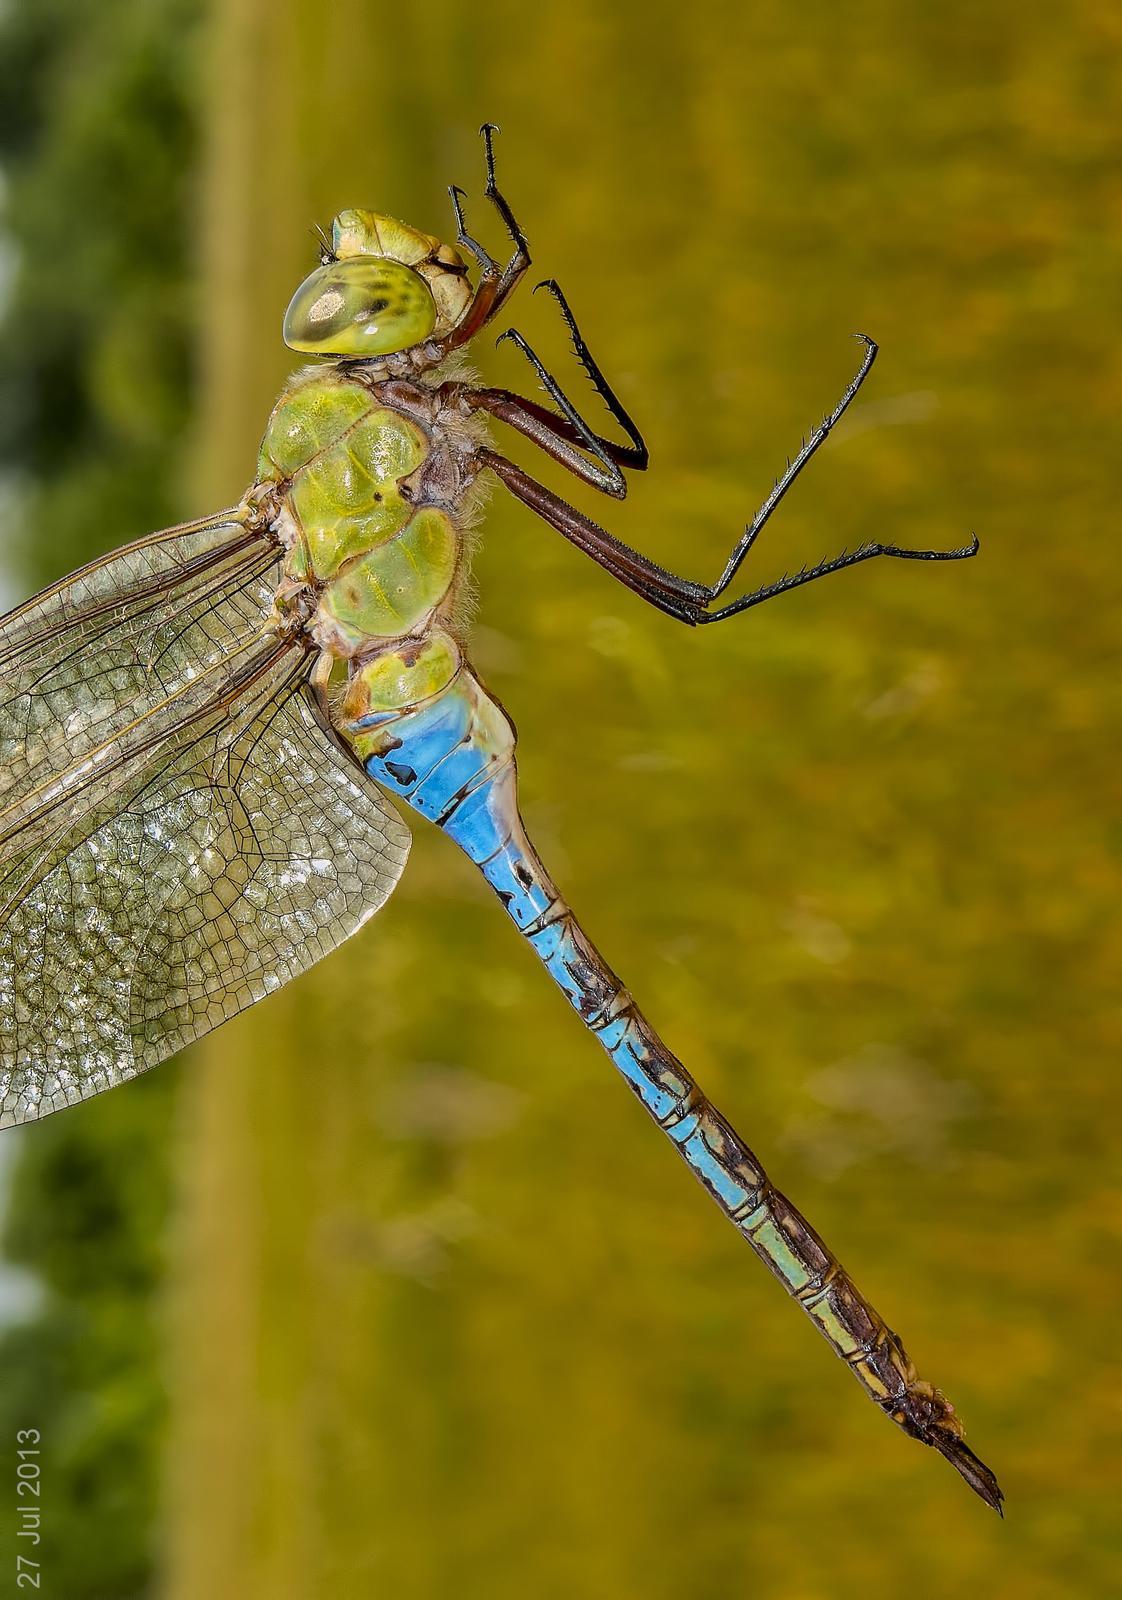 Common Green Darner Photo by Michael Moore